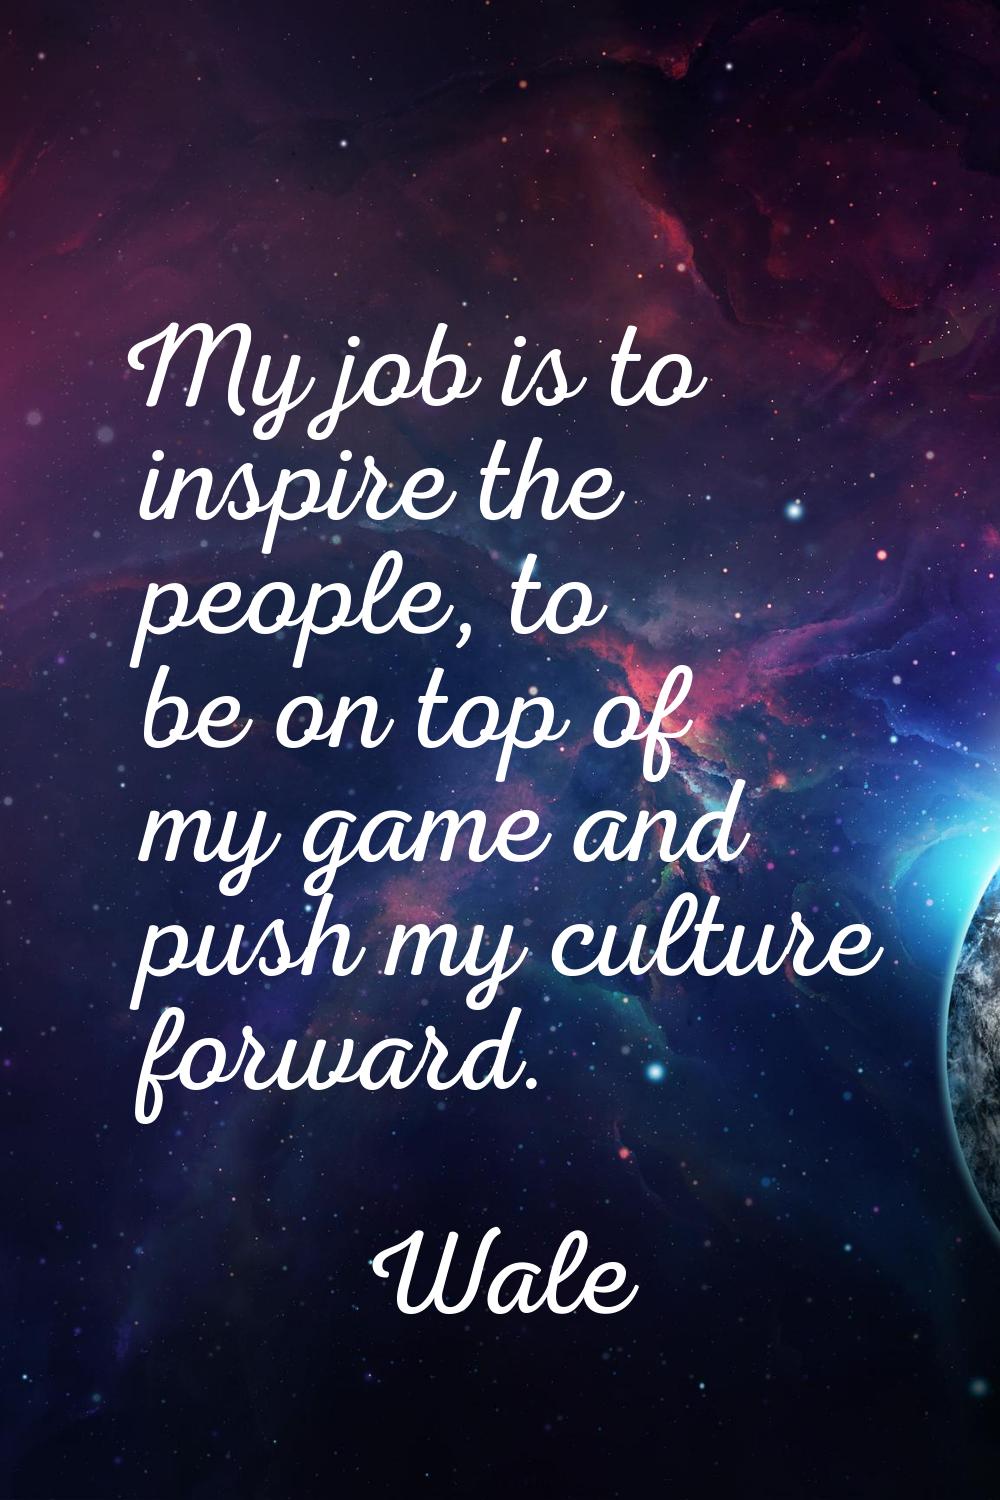 My job is to inspire the people, to be on top of my game and push my culture forward.